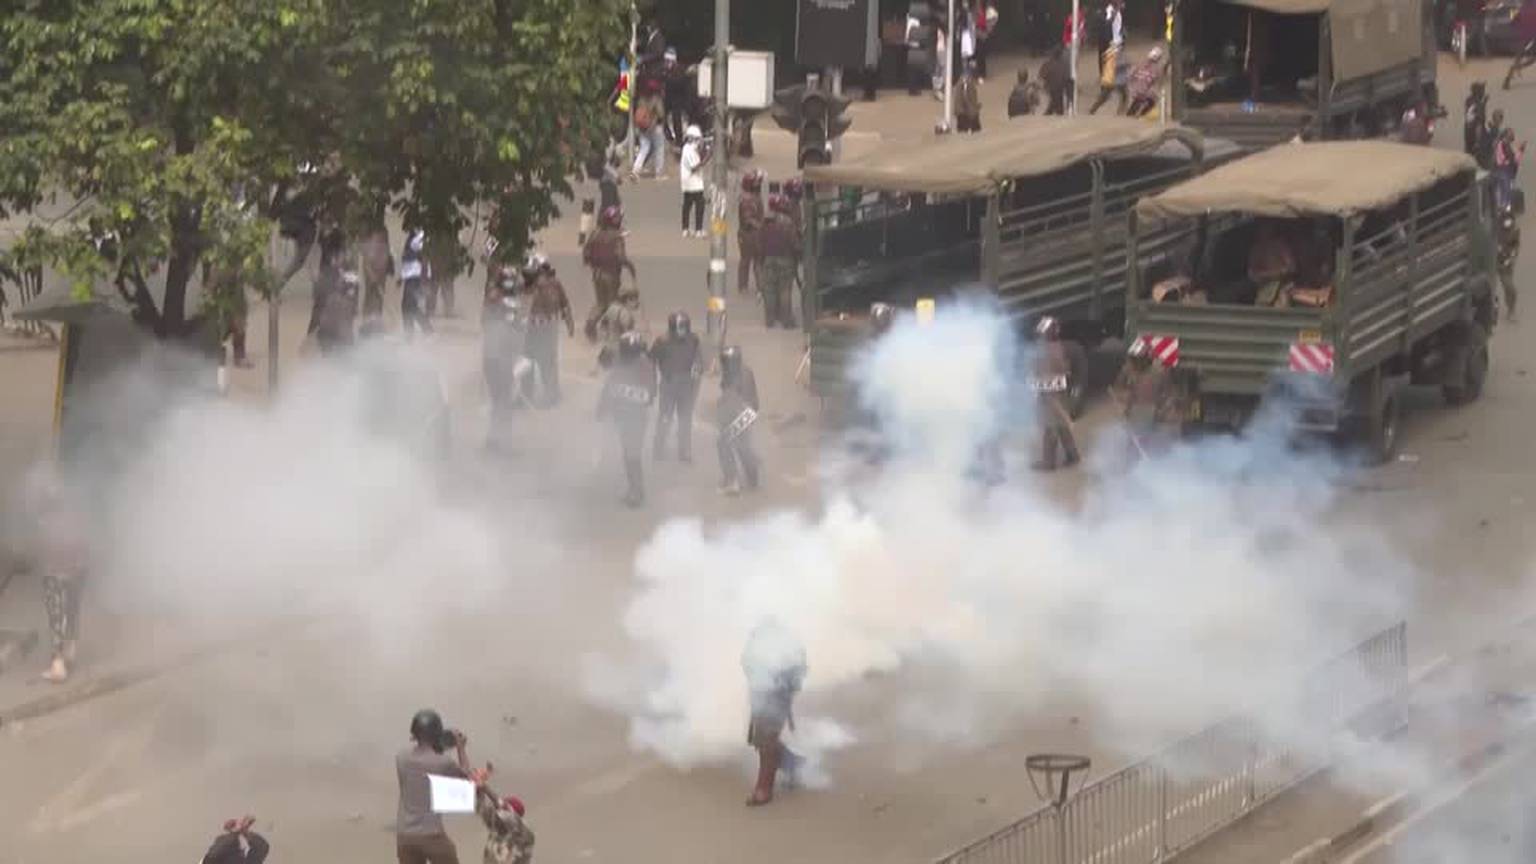 Video: Police in Kenya fire at protesters trying to storm parliament [Video]